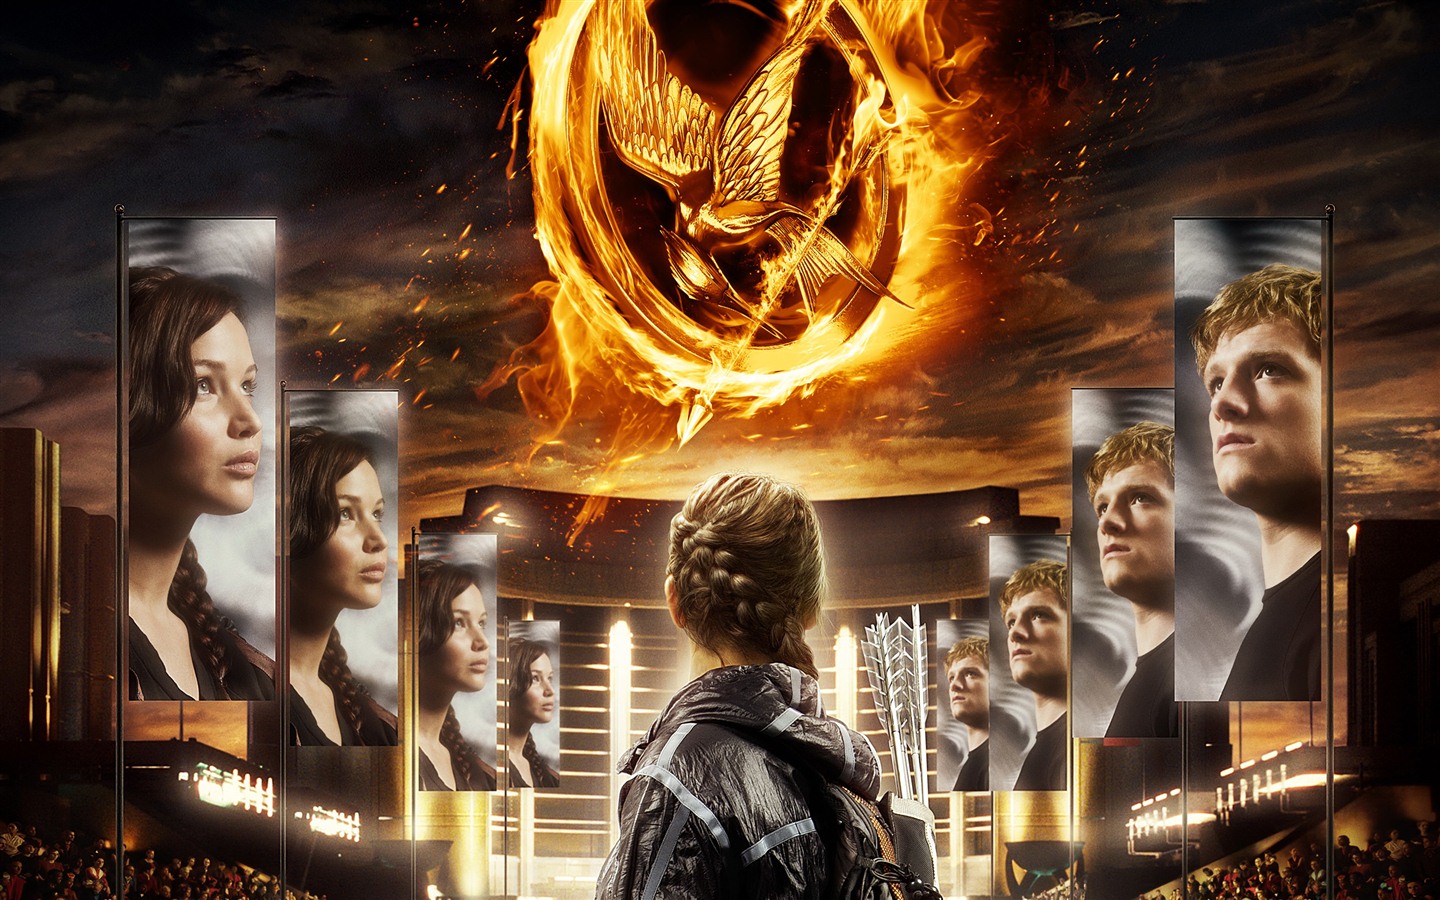 The Hunger Games HD wallpapers #1 - 1440x900